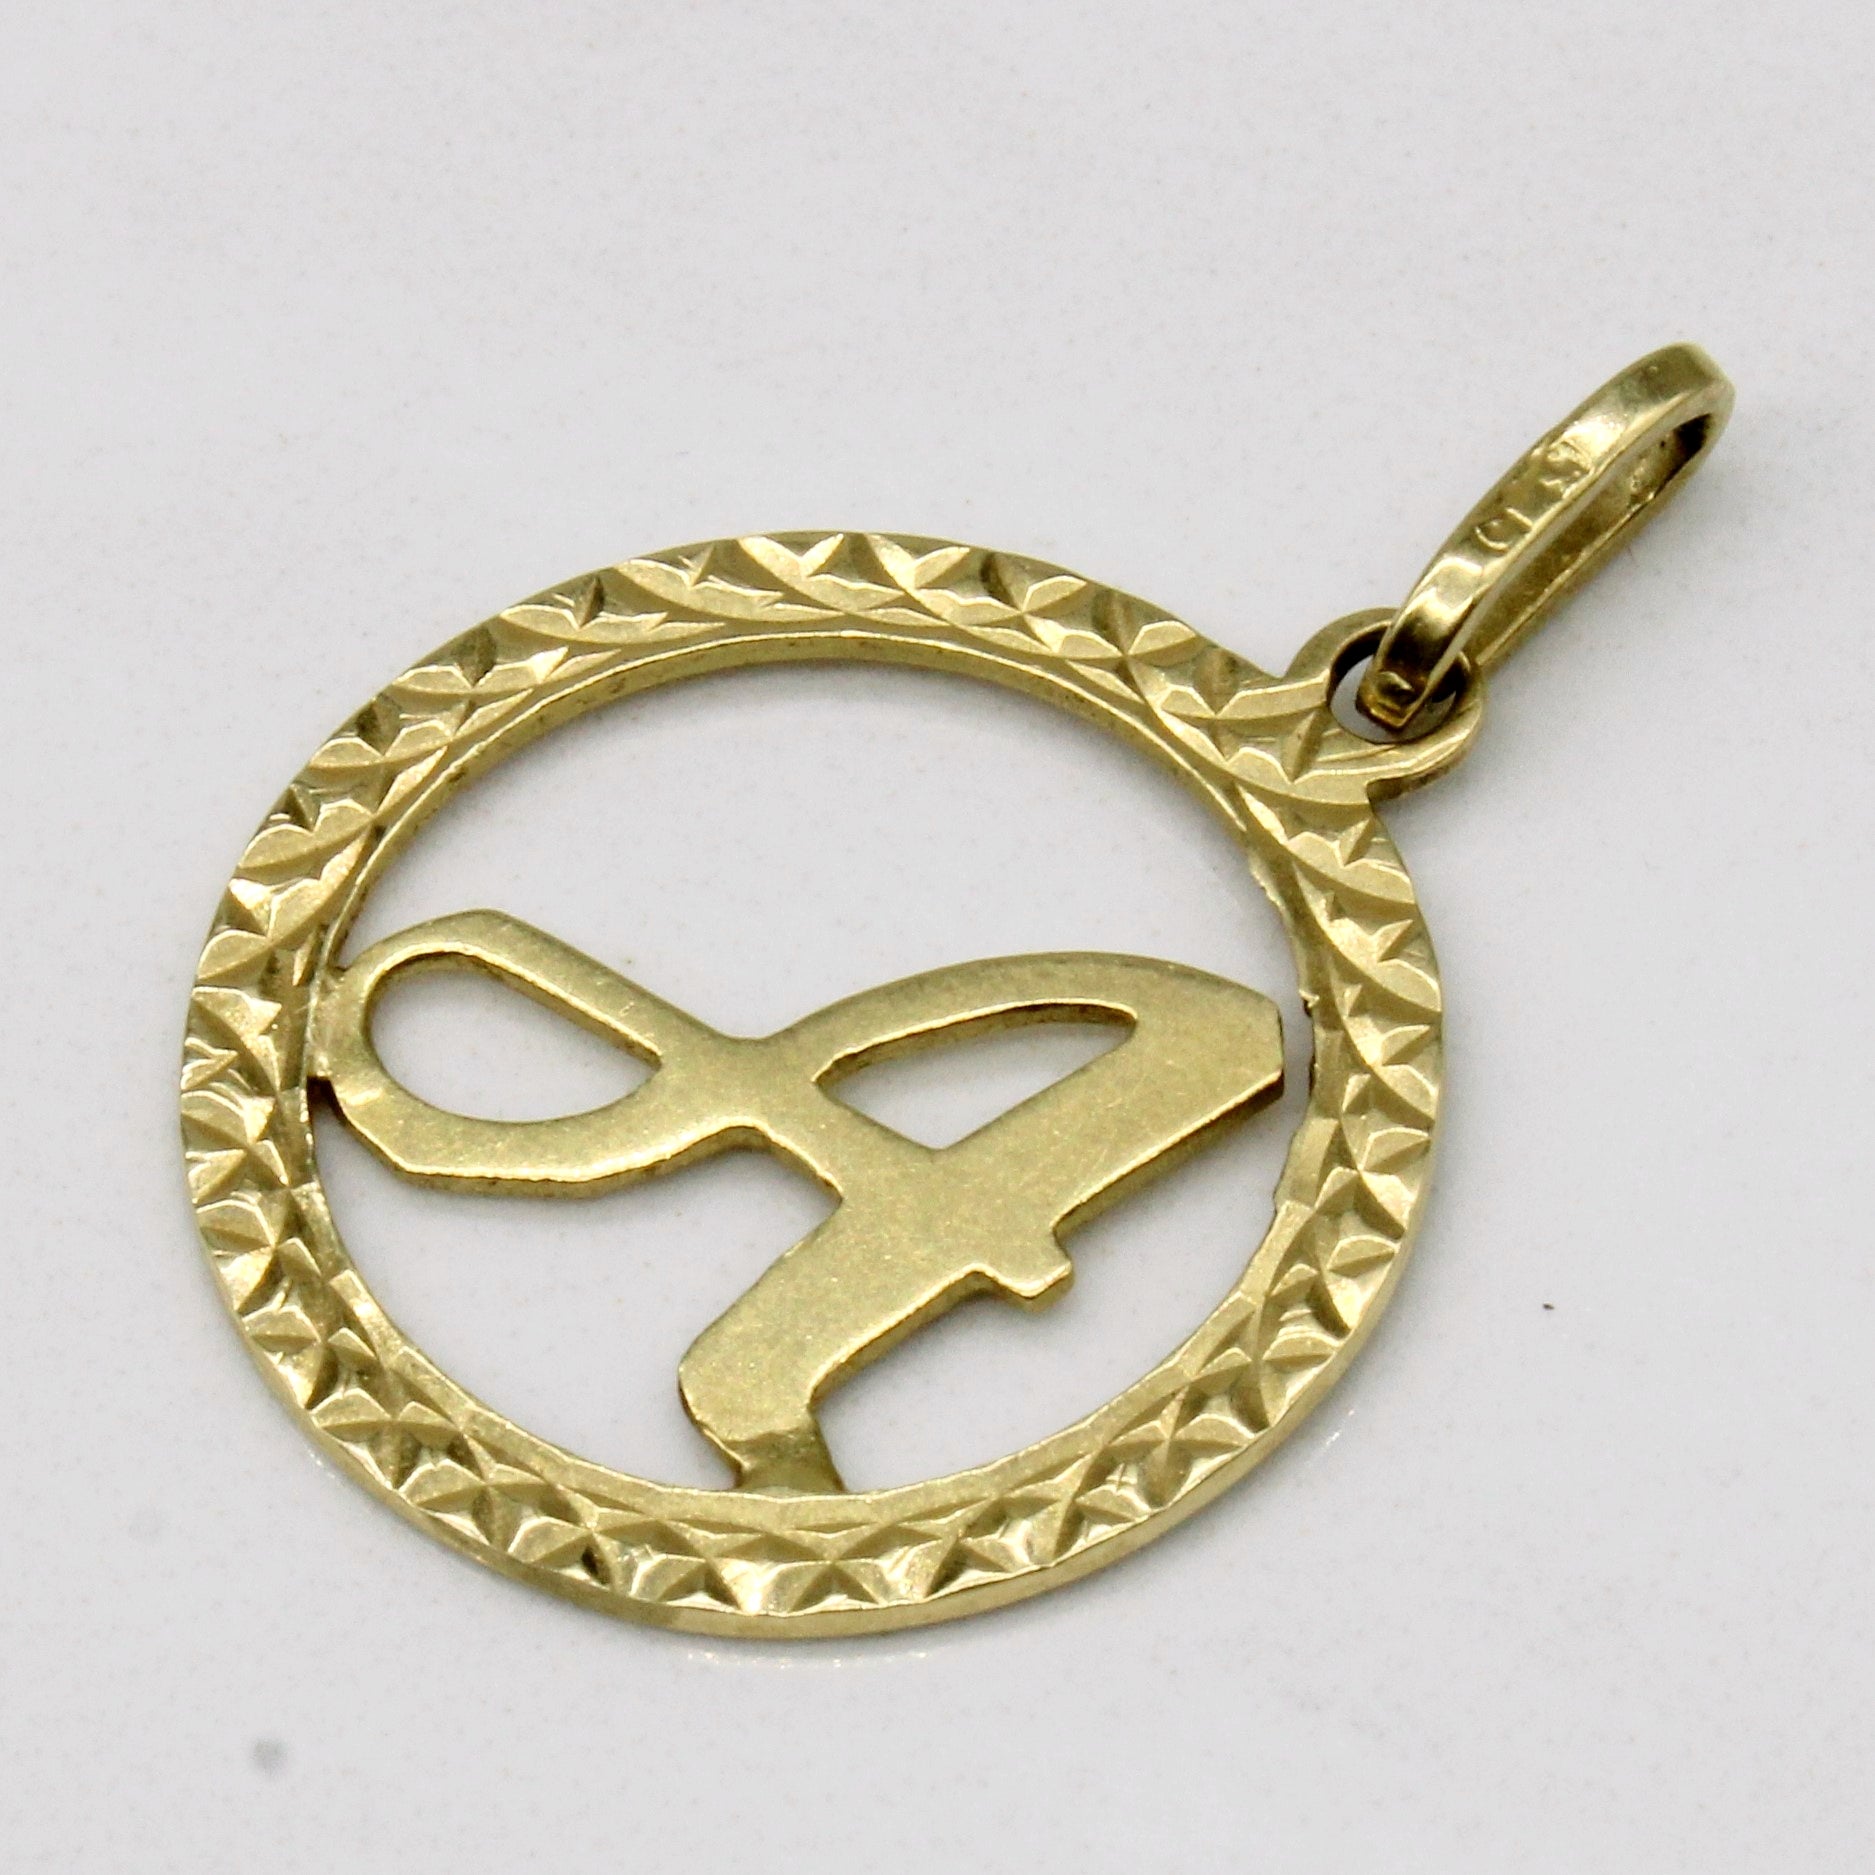 14k Yellow Gold 'A' Charm